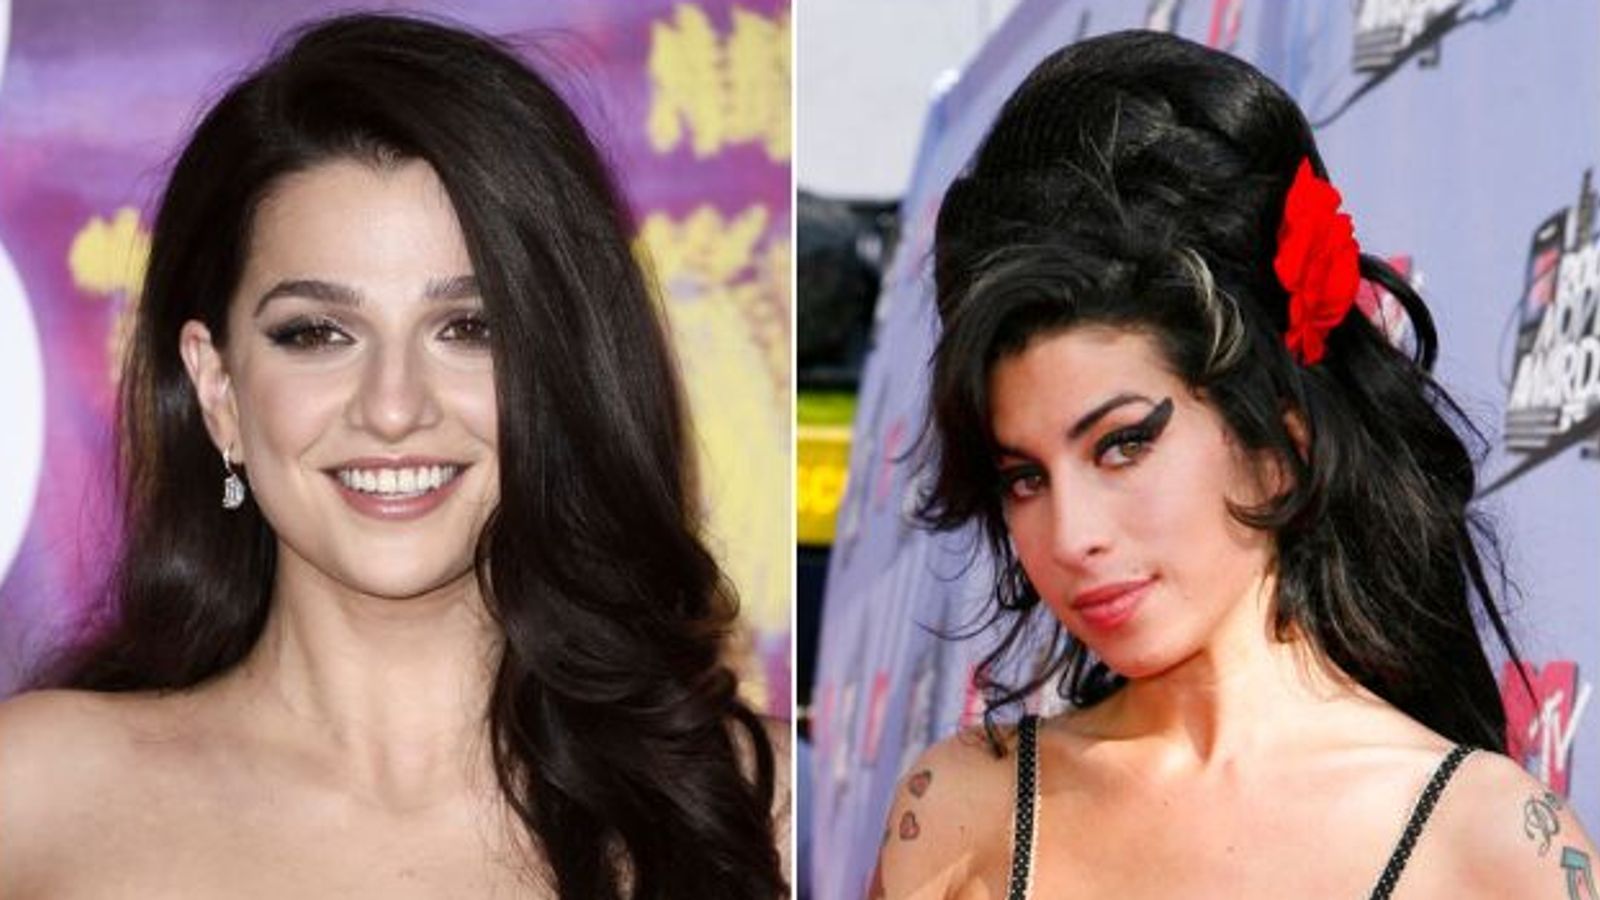 Actor Marisa Abela to portray Amy Winehouse in new biopic